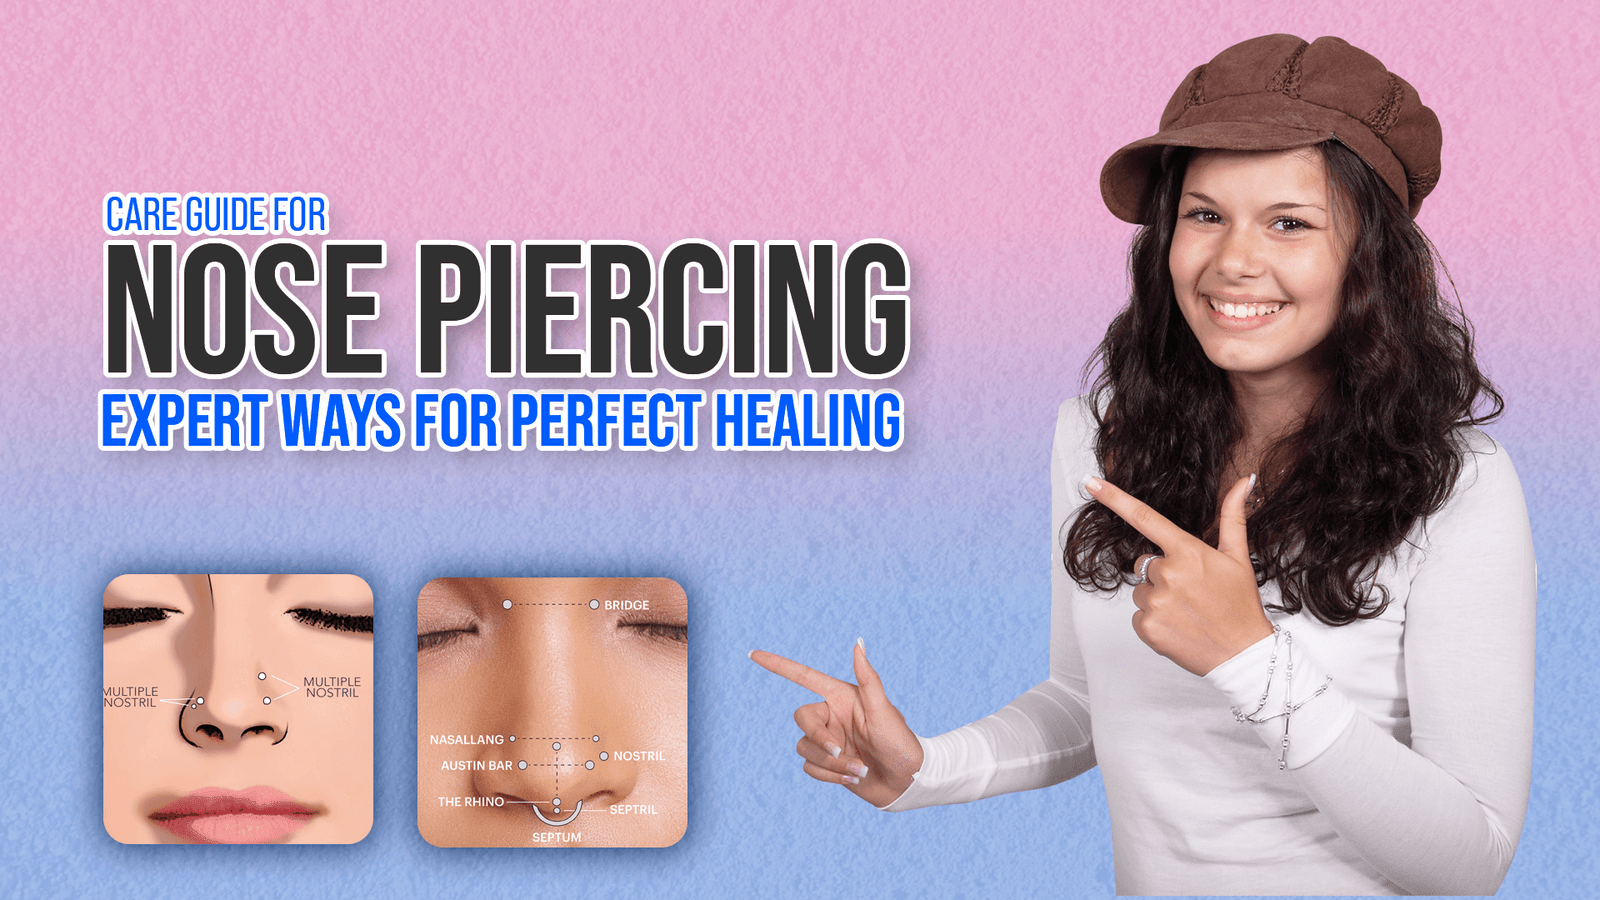 Care Guide for Nose Piercing Expert Ways for Perfect Healing